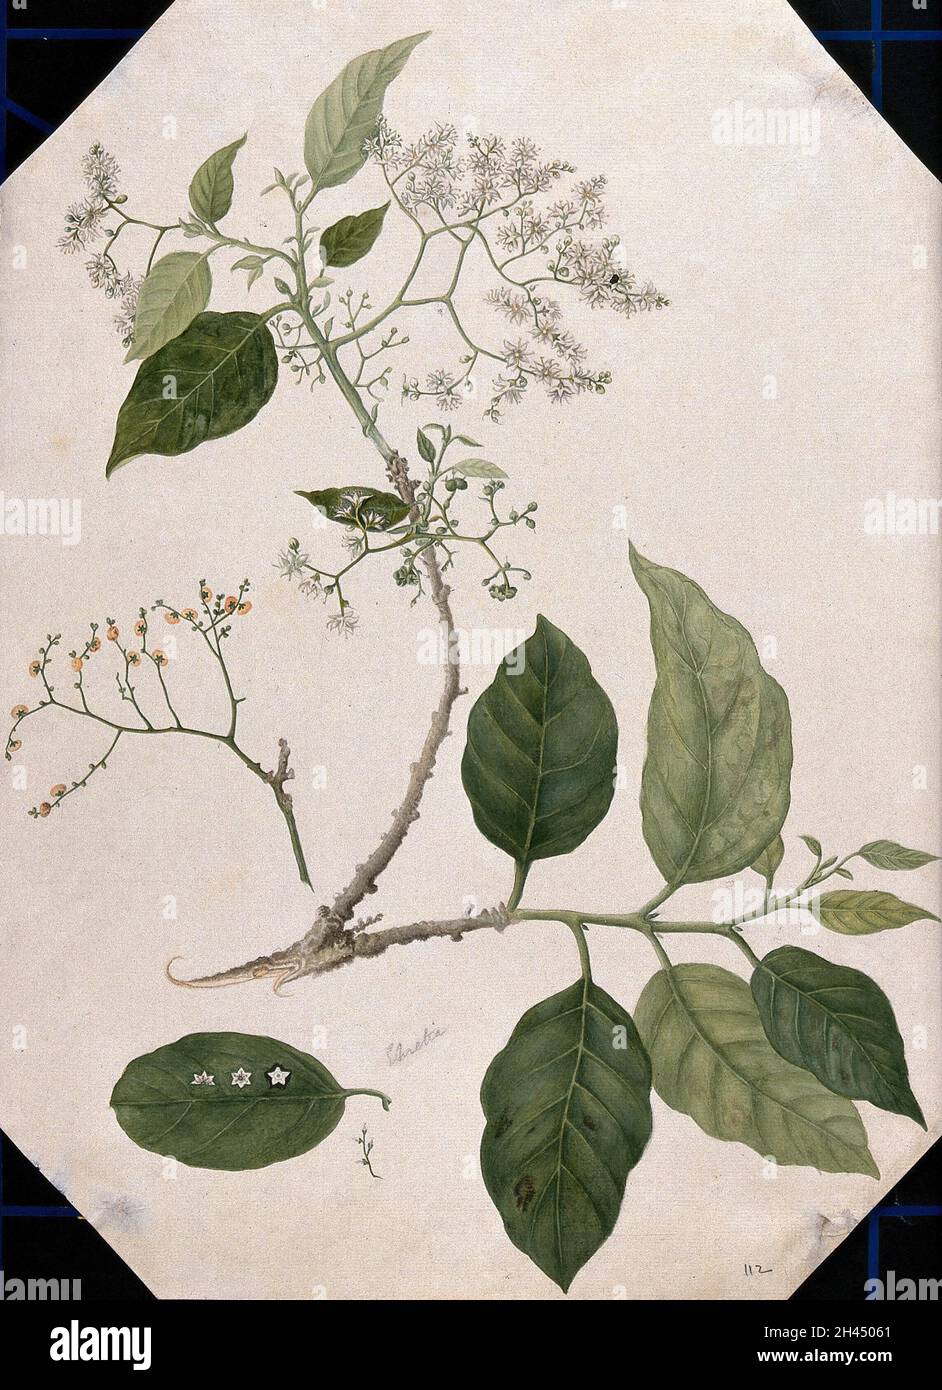 A species of Ehretia: large flowering stem with separate leaf, fruit and flowers. Watercolour, 17--. Stock Photo